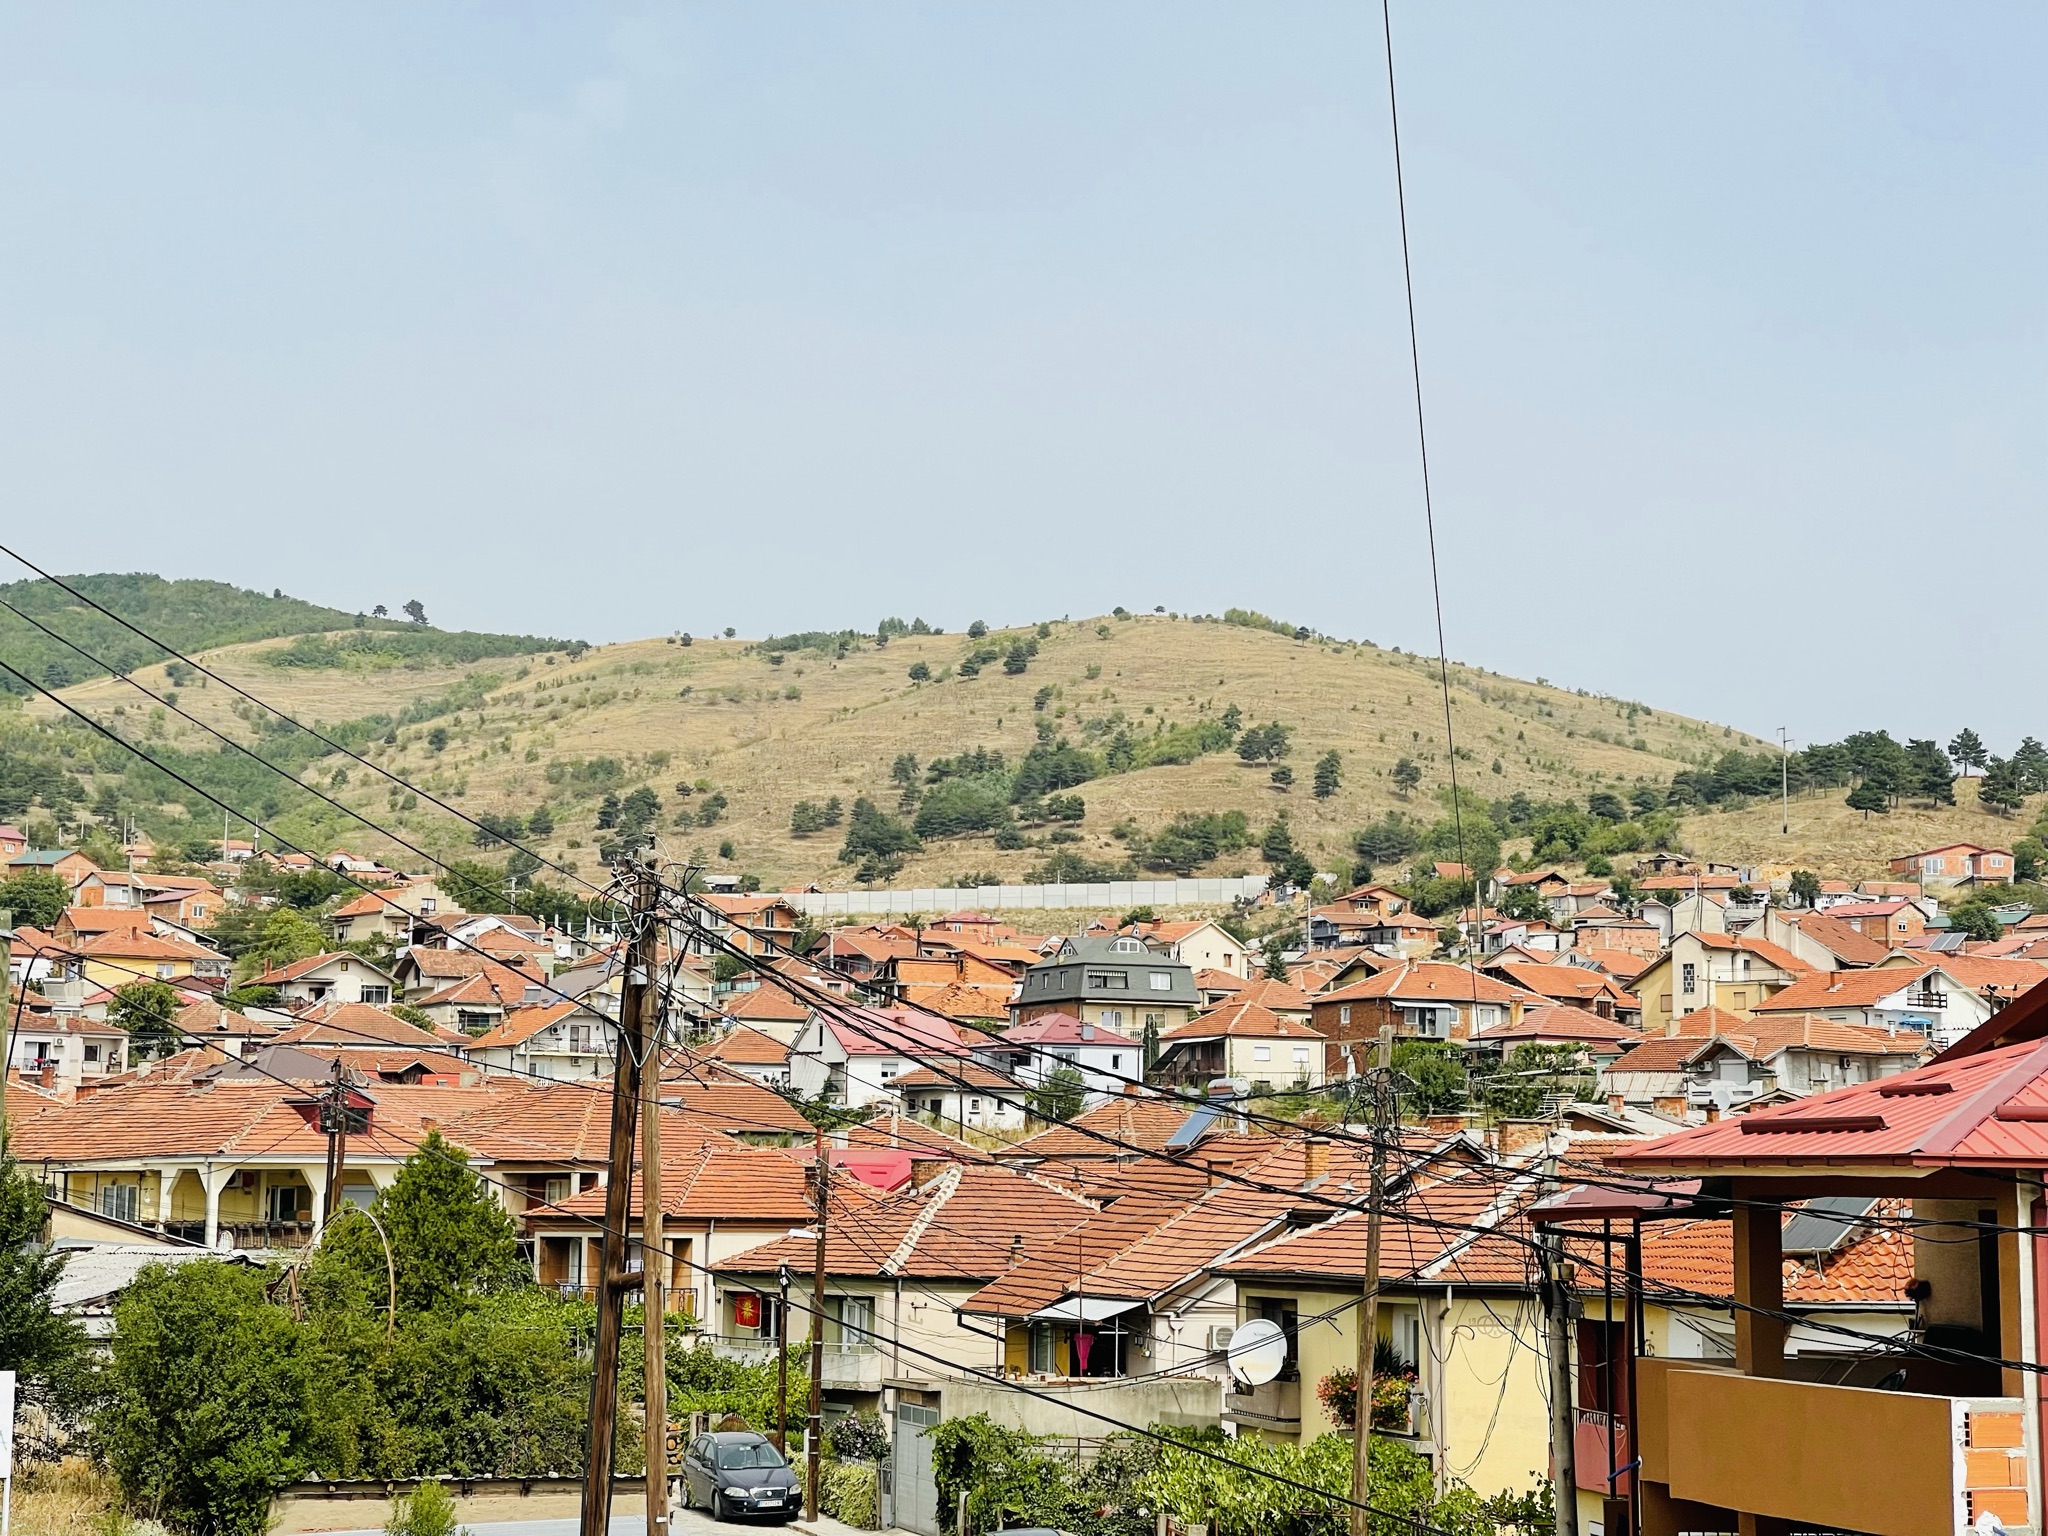 BAIR - Bitola’s joint Action for the Inclusion of Roma